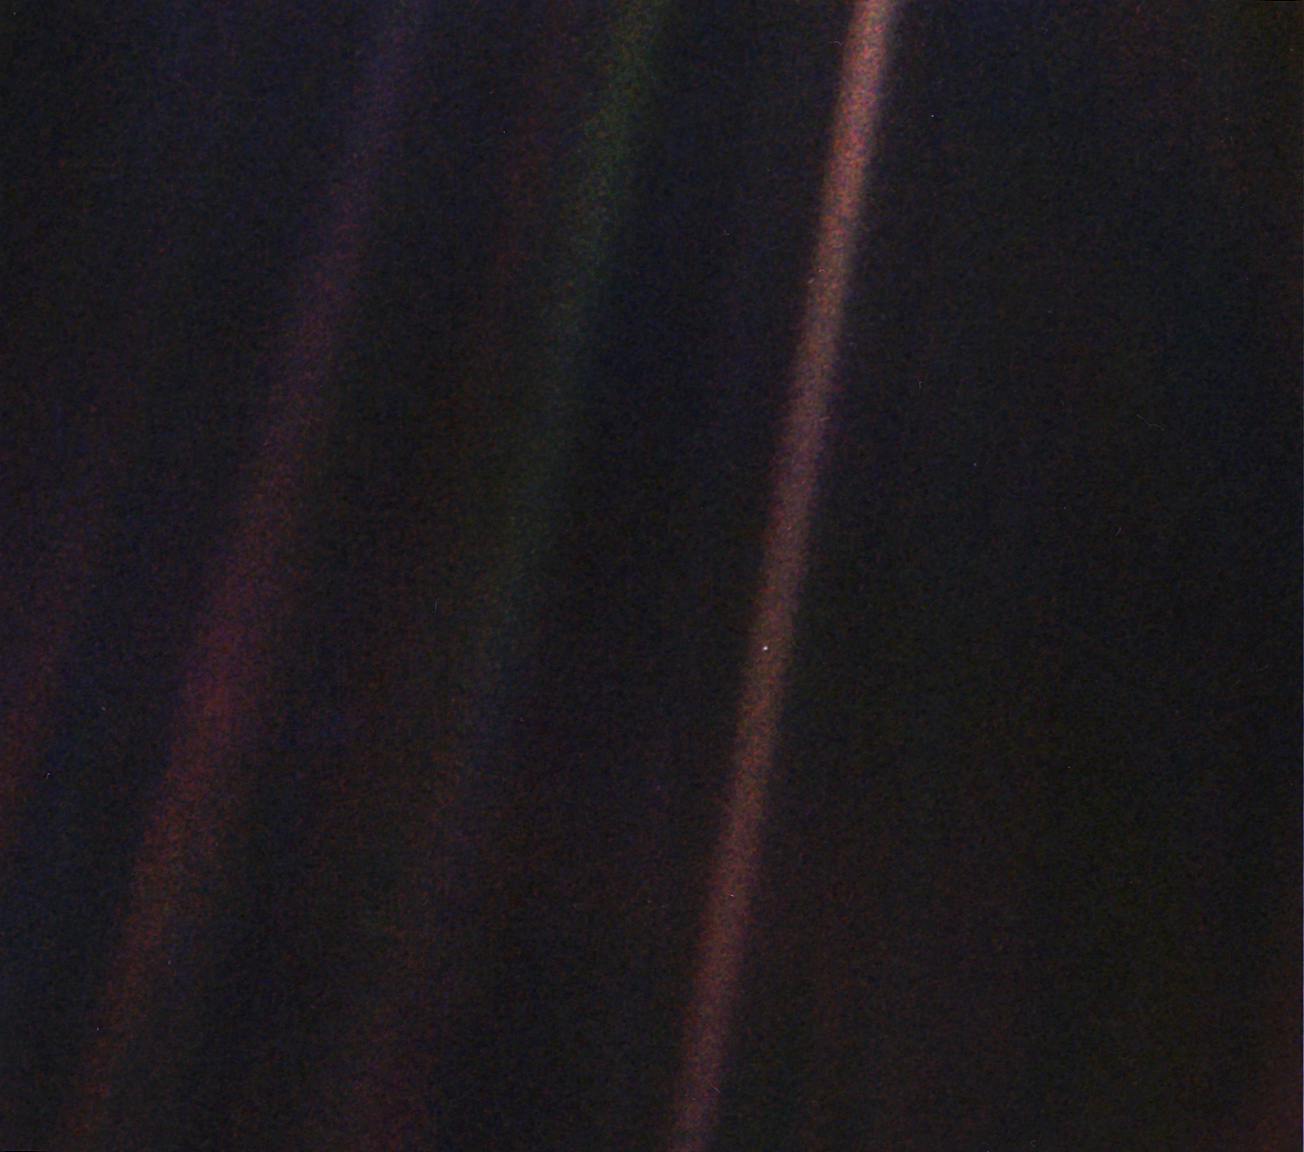 Earth from 4 billion miles away